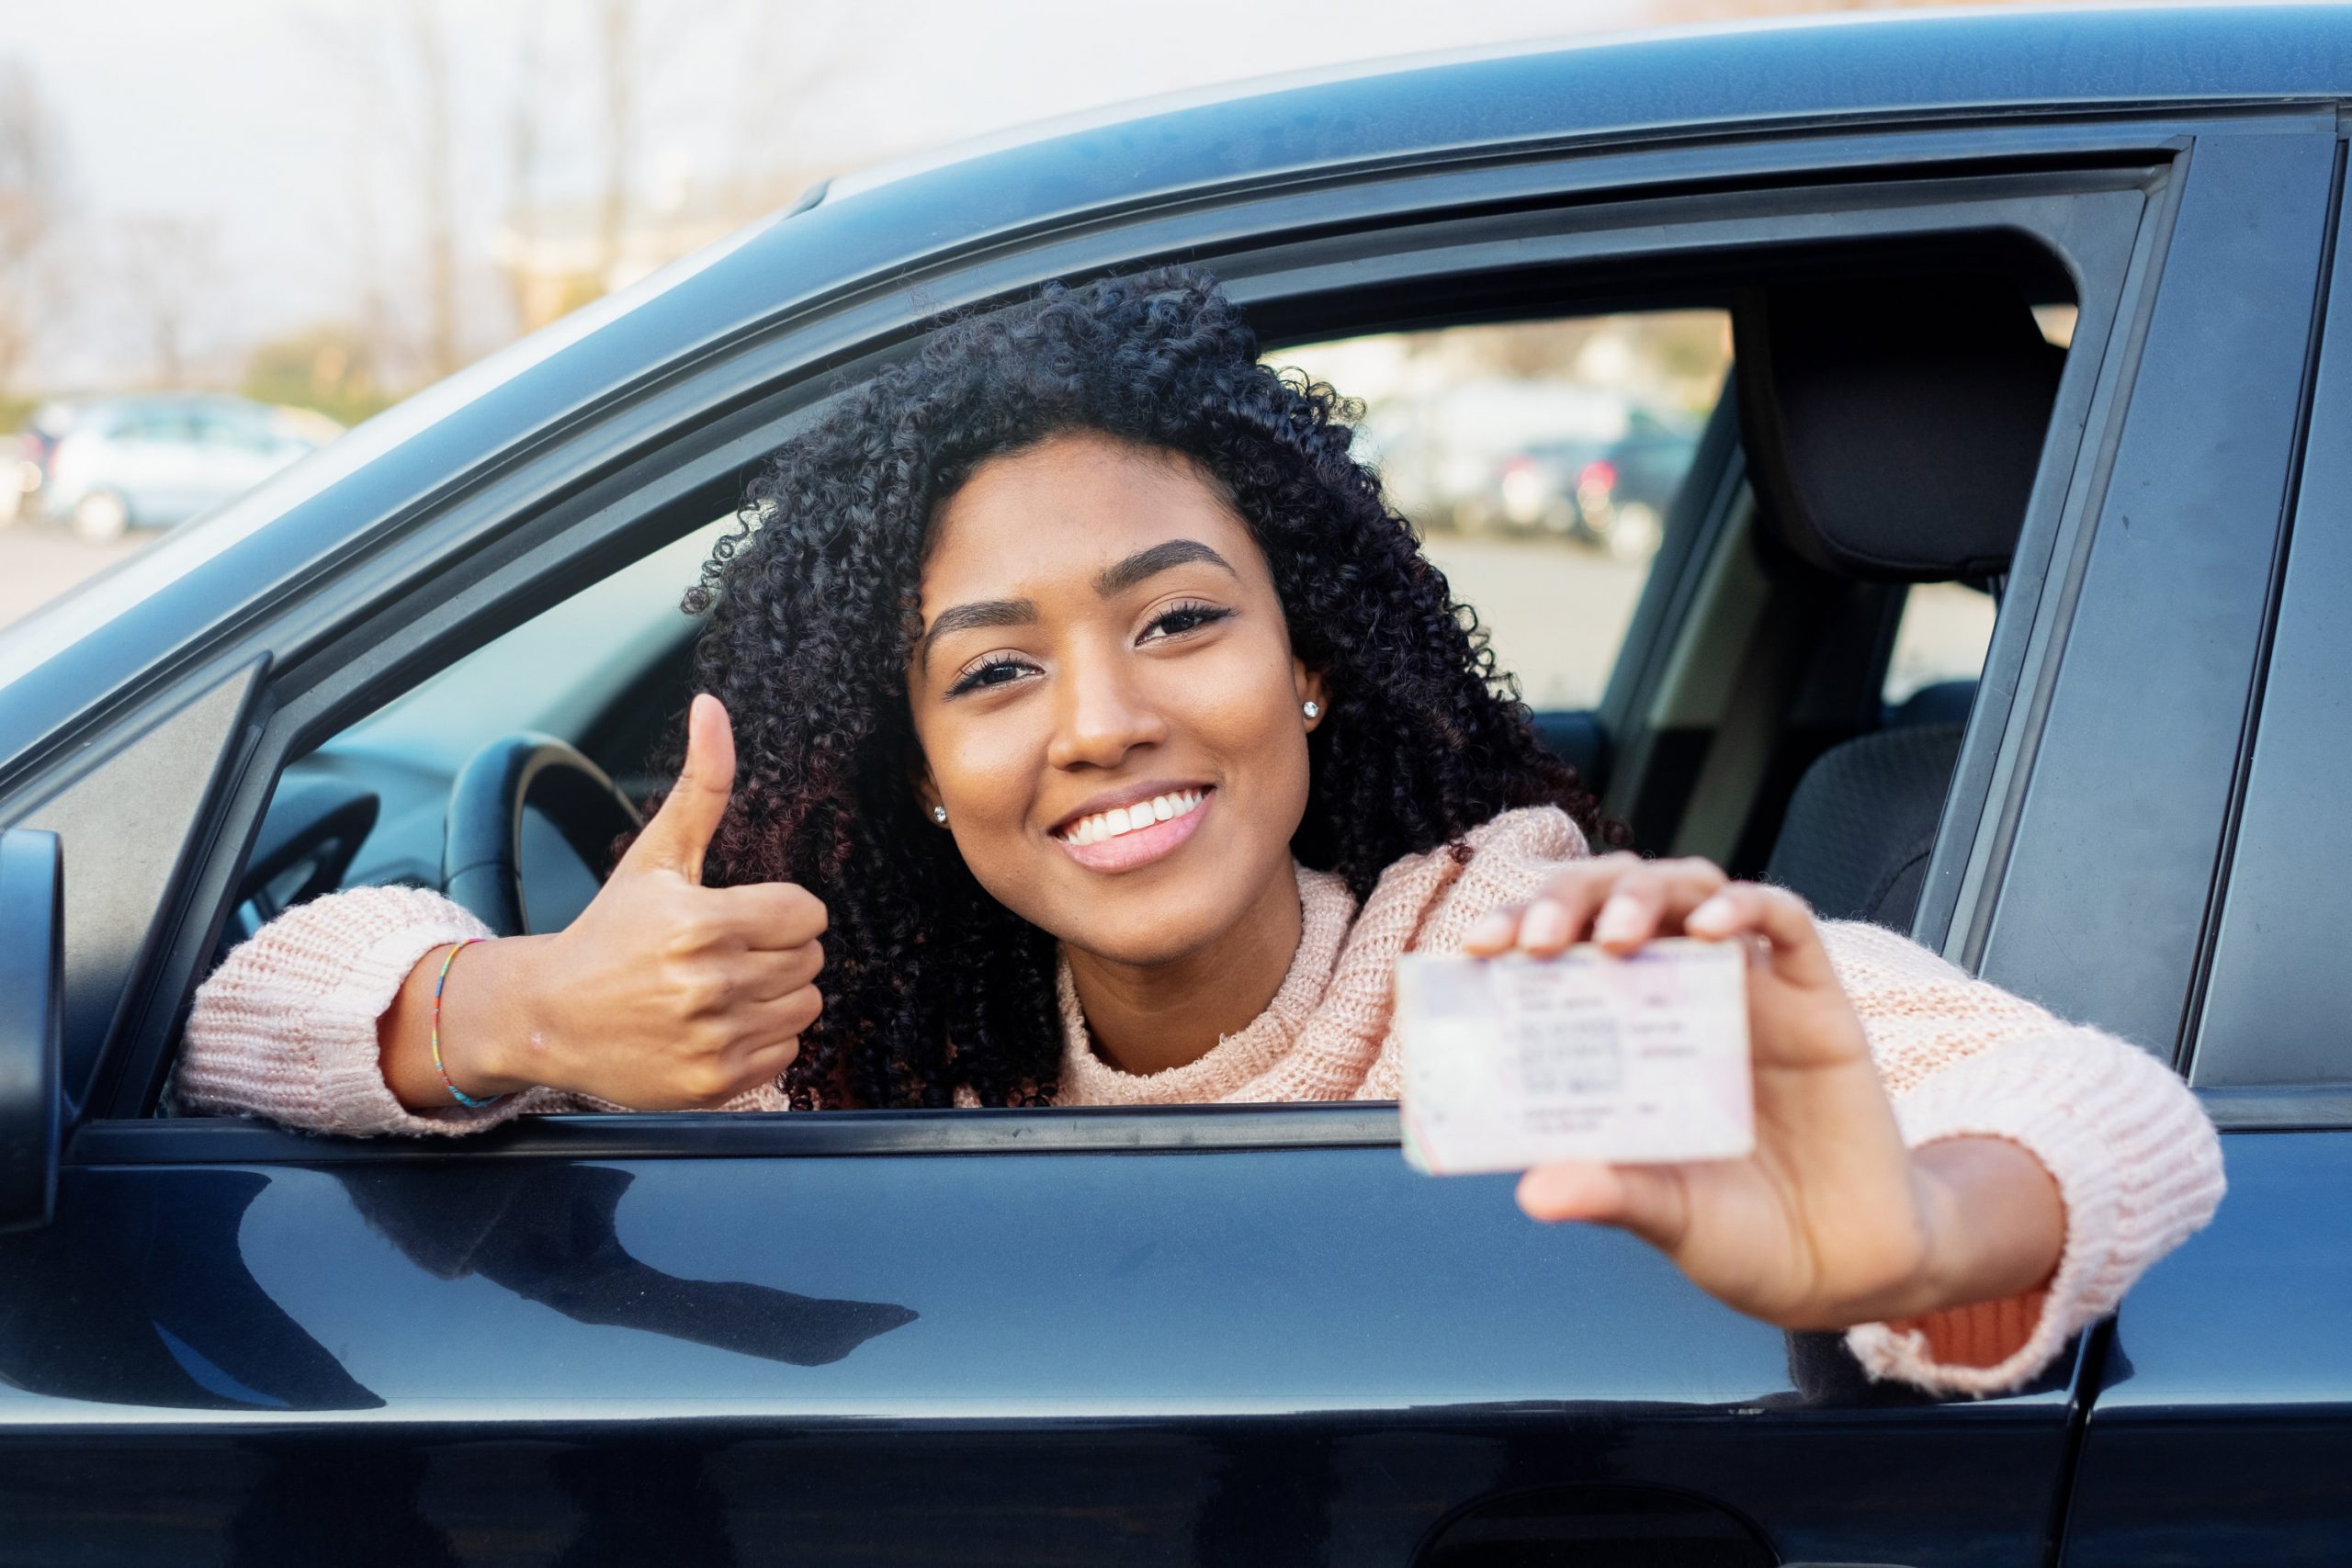 How to Check If Driver’s License is Ready in Nigeria